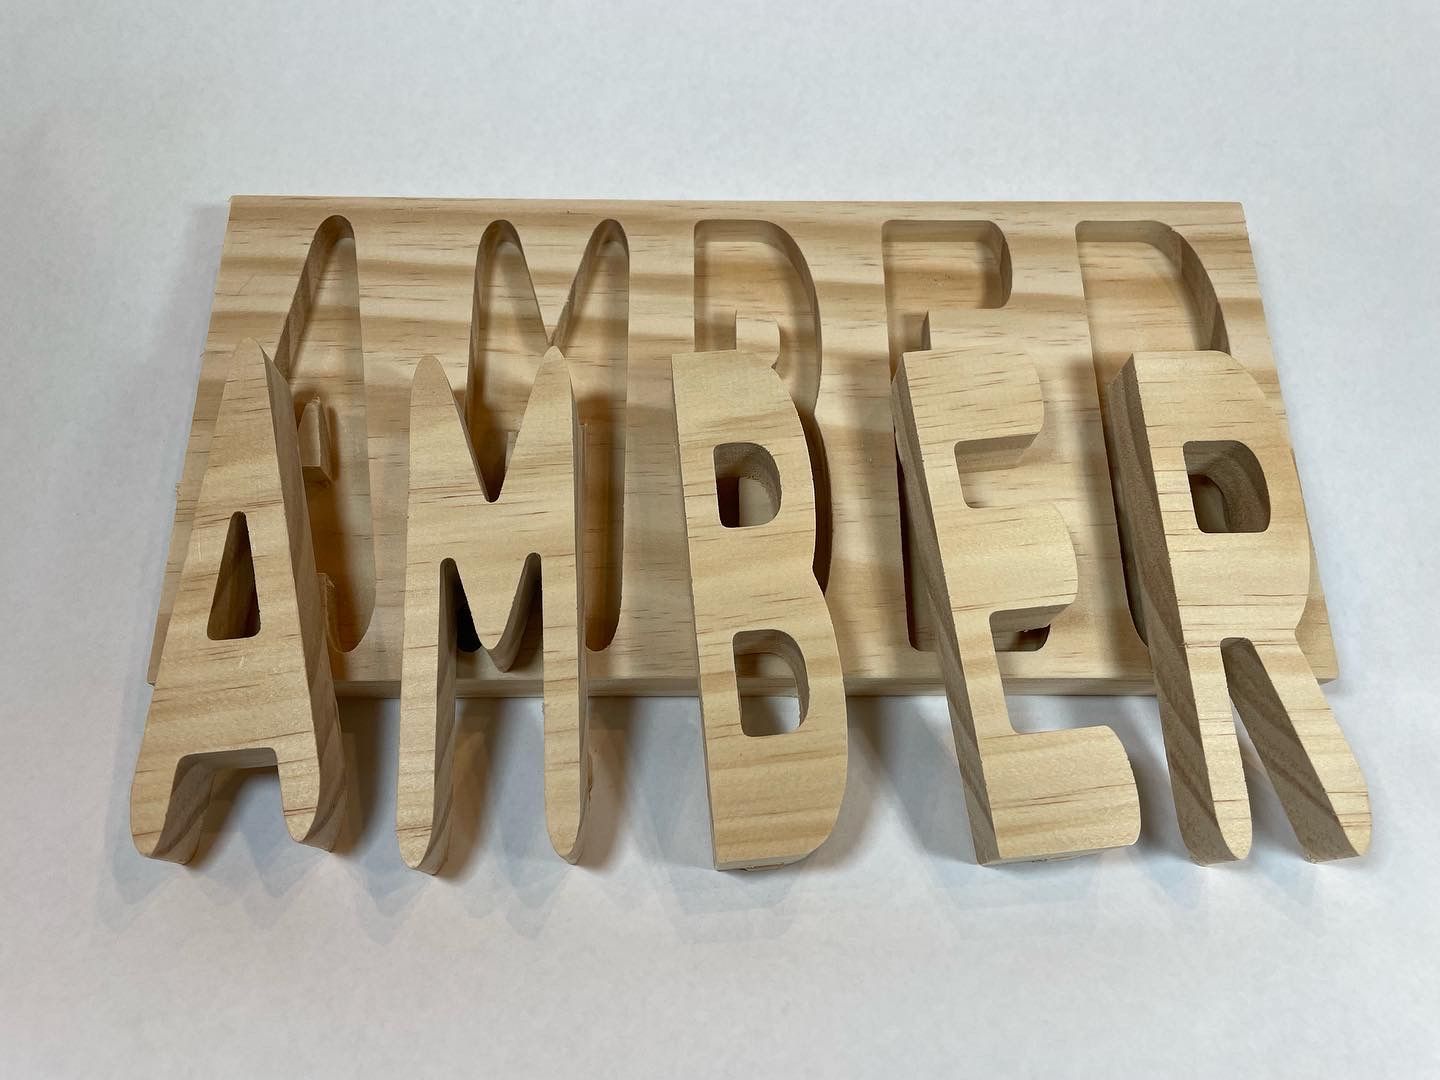 The word amber is cut out of wood on a white surface